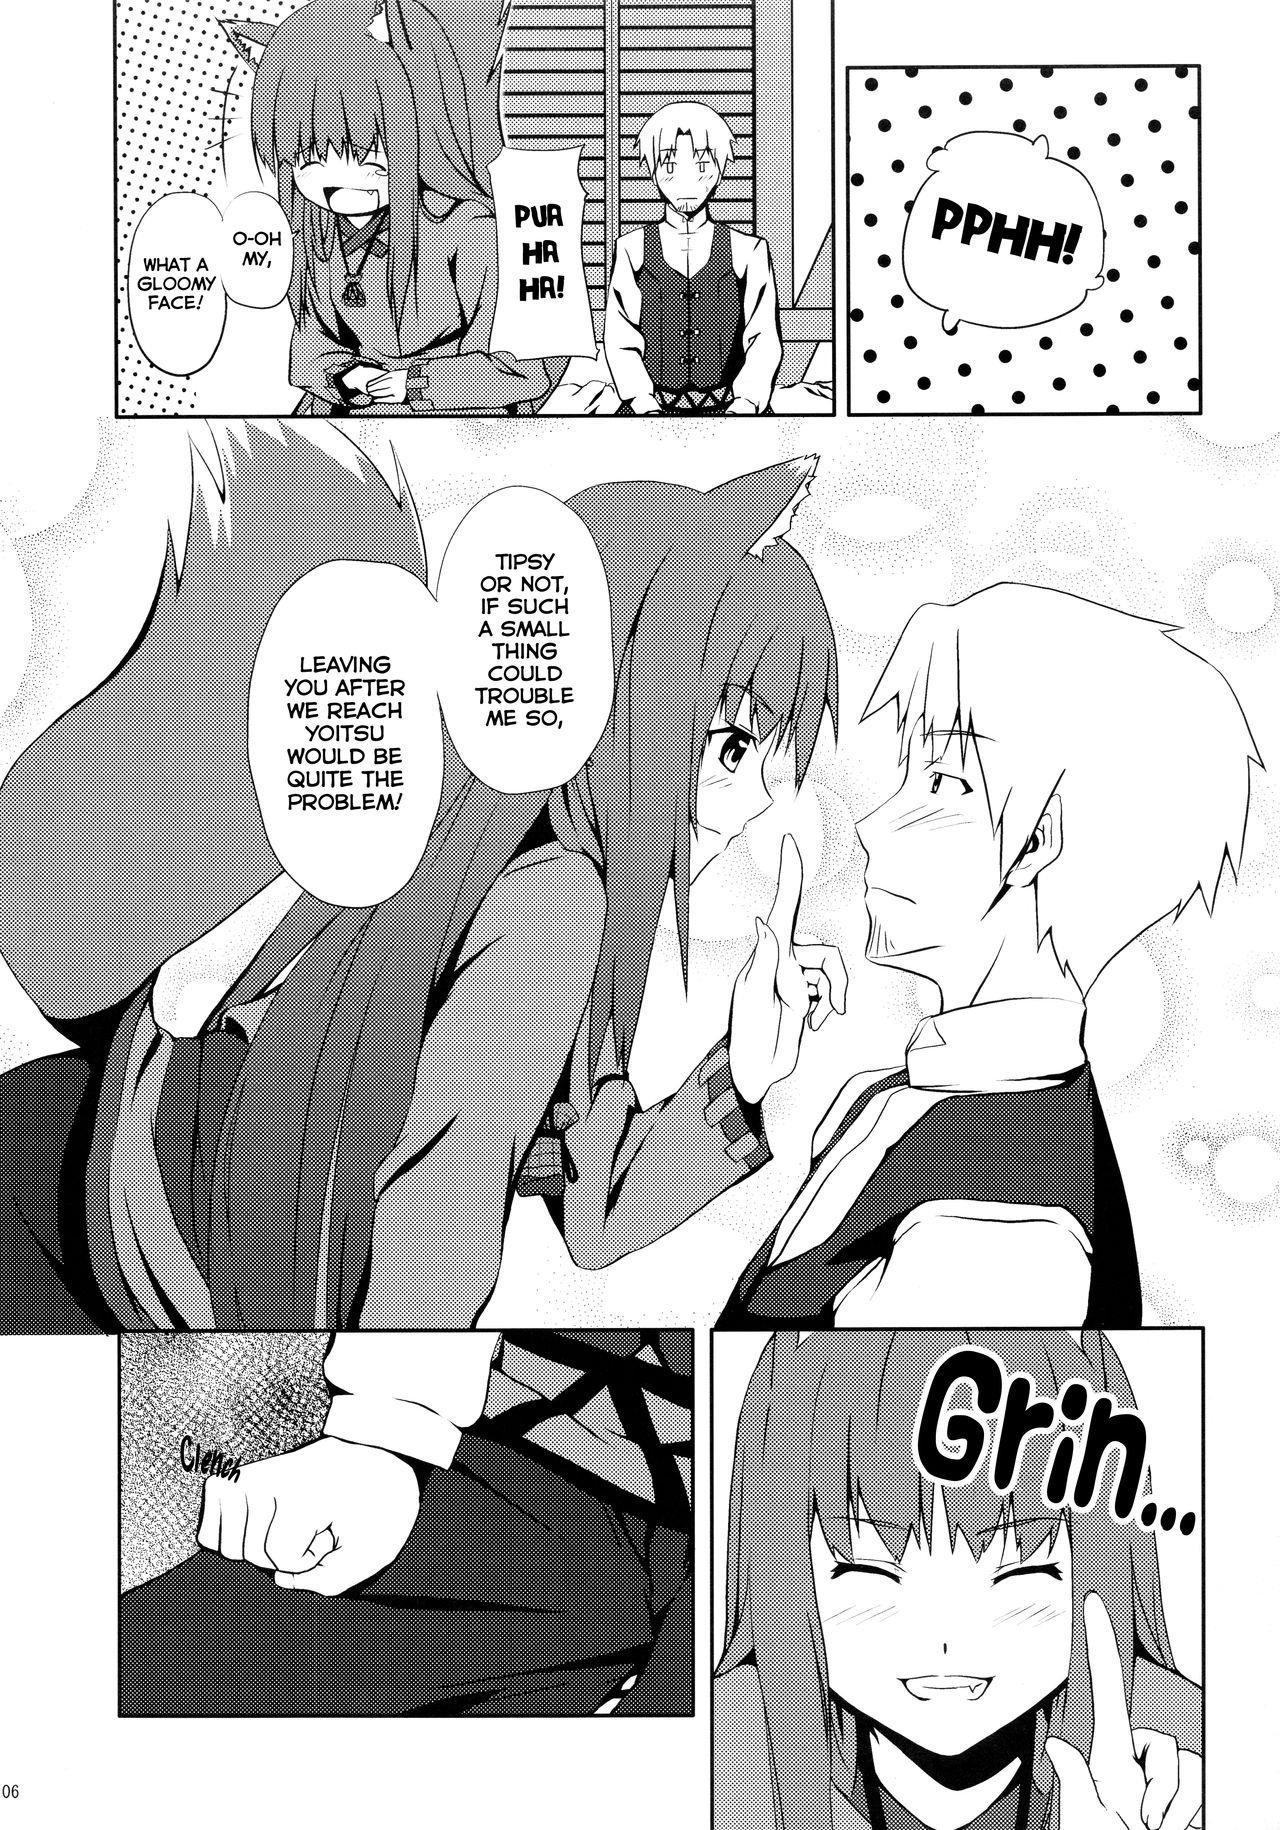 Cei Bitter Apple - Spice and wolf Japanese - Page 6